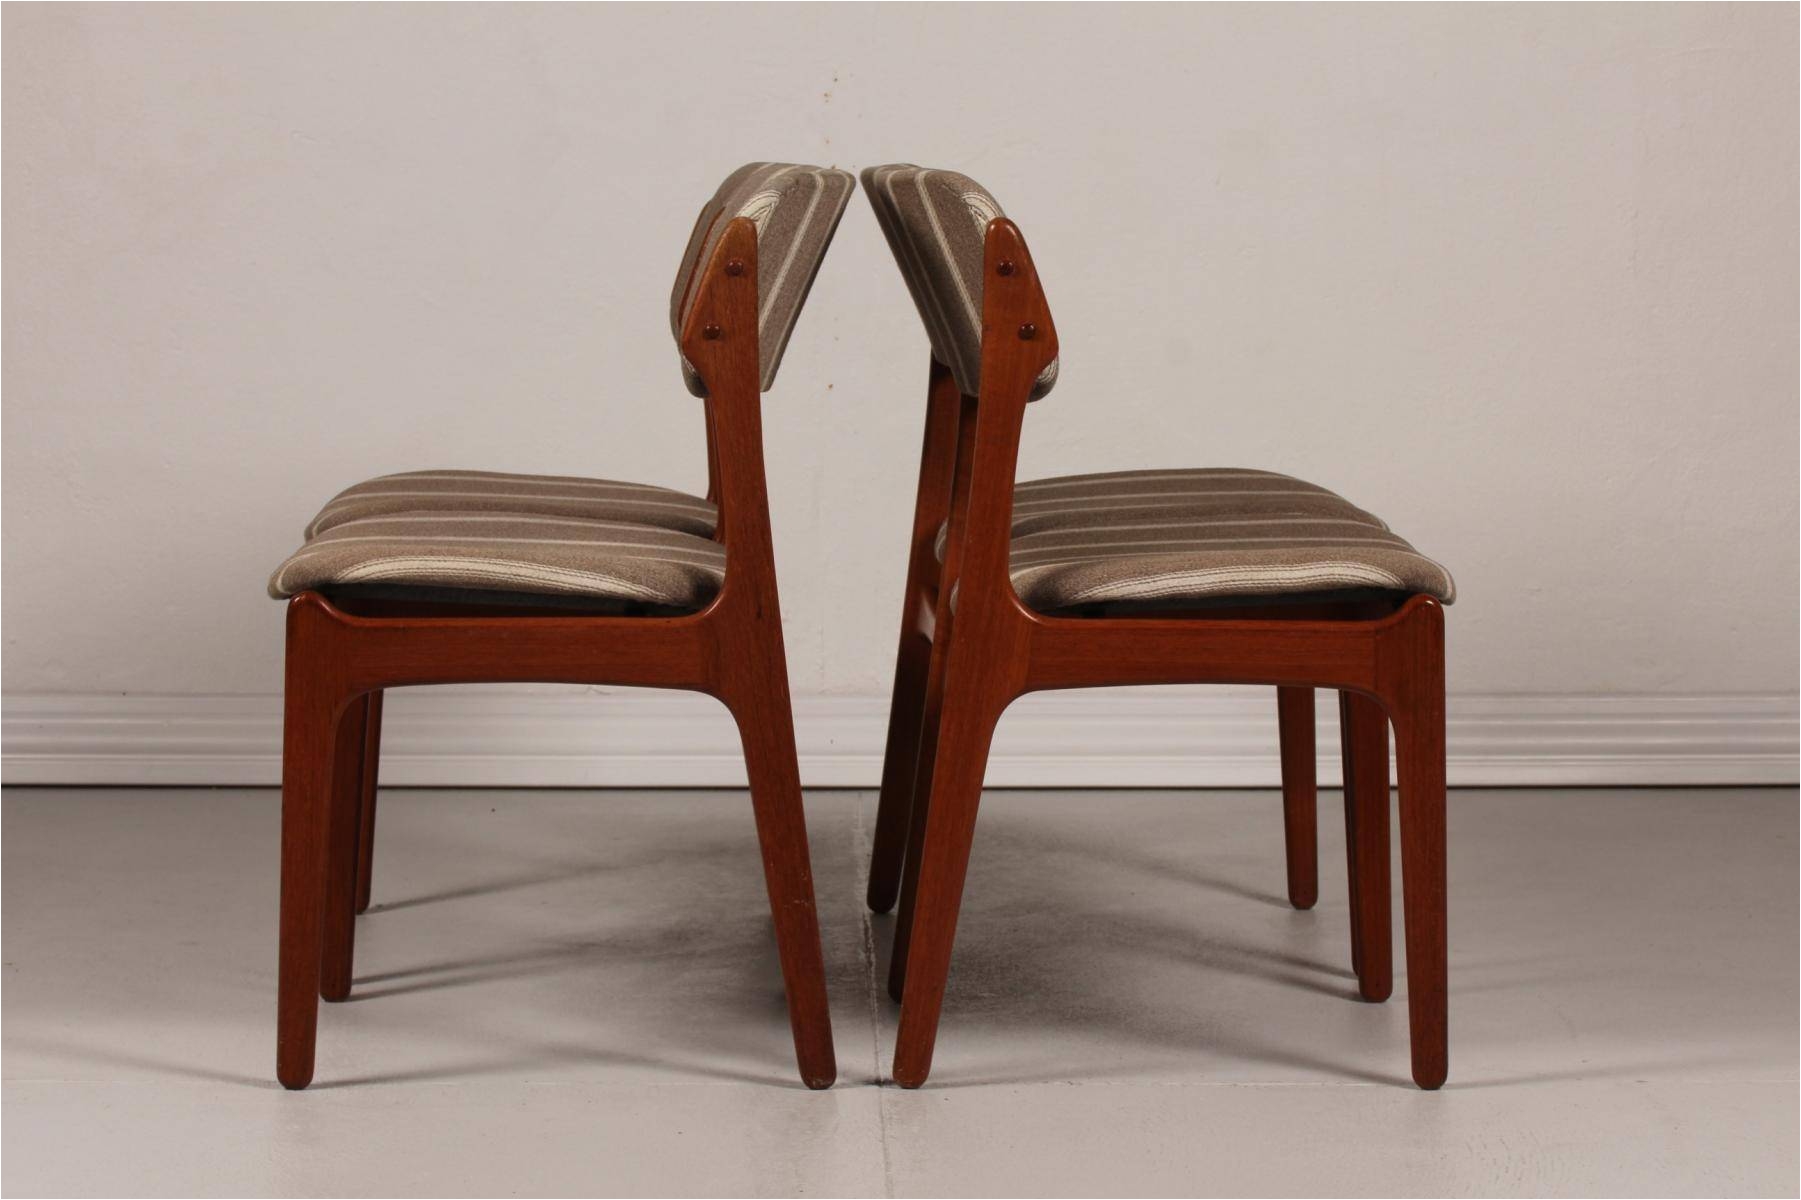 Wooden Chairs for Rent Manila Chair Bamboo Dining Chair Remarkable Chairs Impressive Thomasville